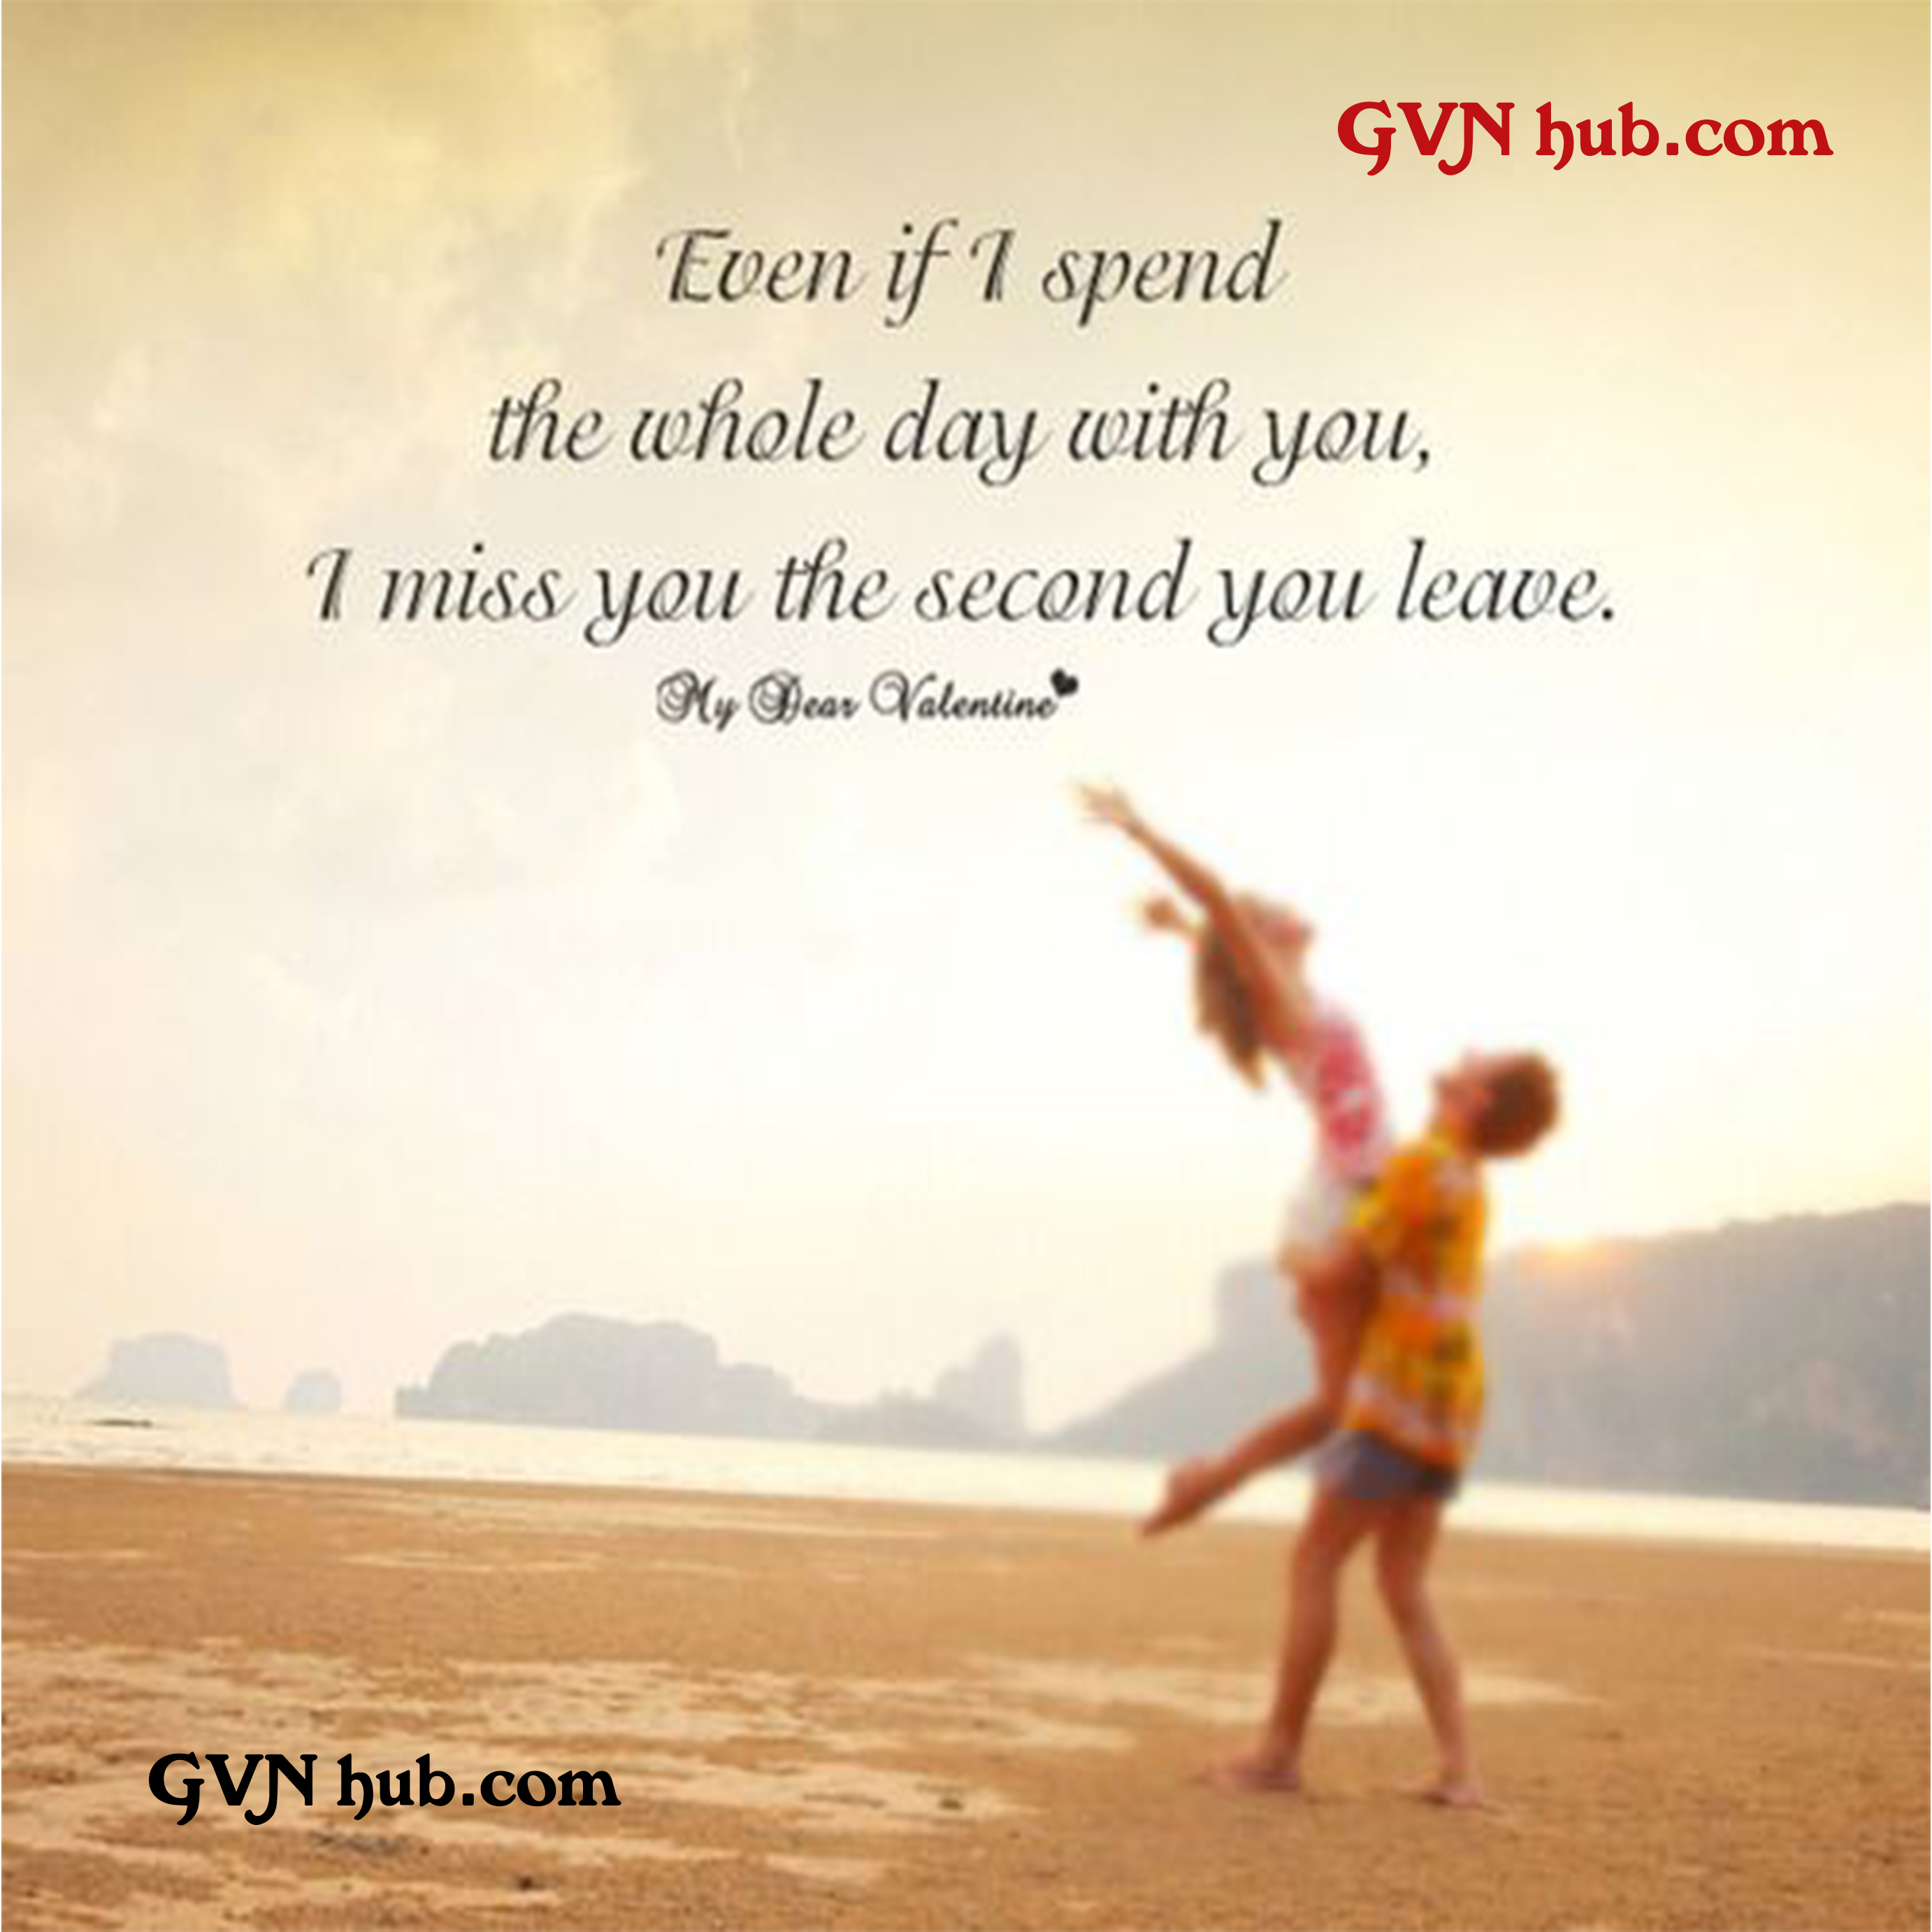 15 Best Heart Touching Miss You Quotes - GVN Hub